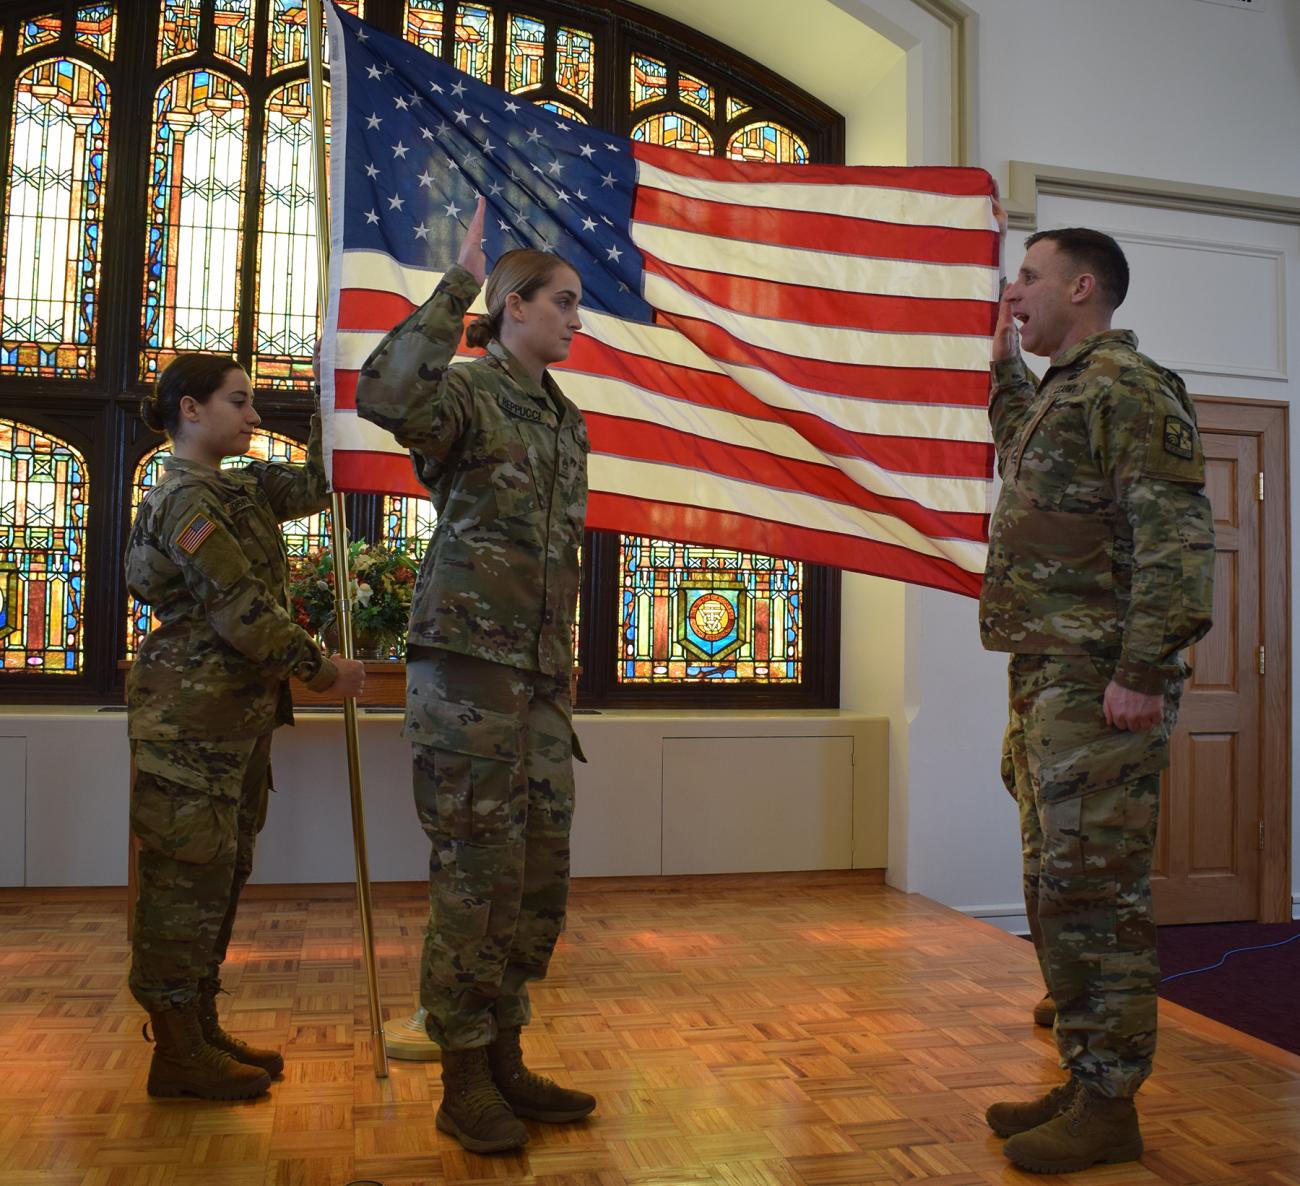 In a recent ceremony on campus recognizing the ROTC grants, Springfield College junior and ROTC scholarship recipient Madelyn Reppucci was recognized at an official ROTC signing and swearing-in ceremony in the Marsh Memorial Chapel.